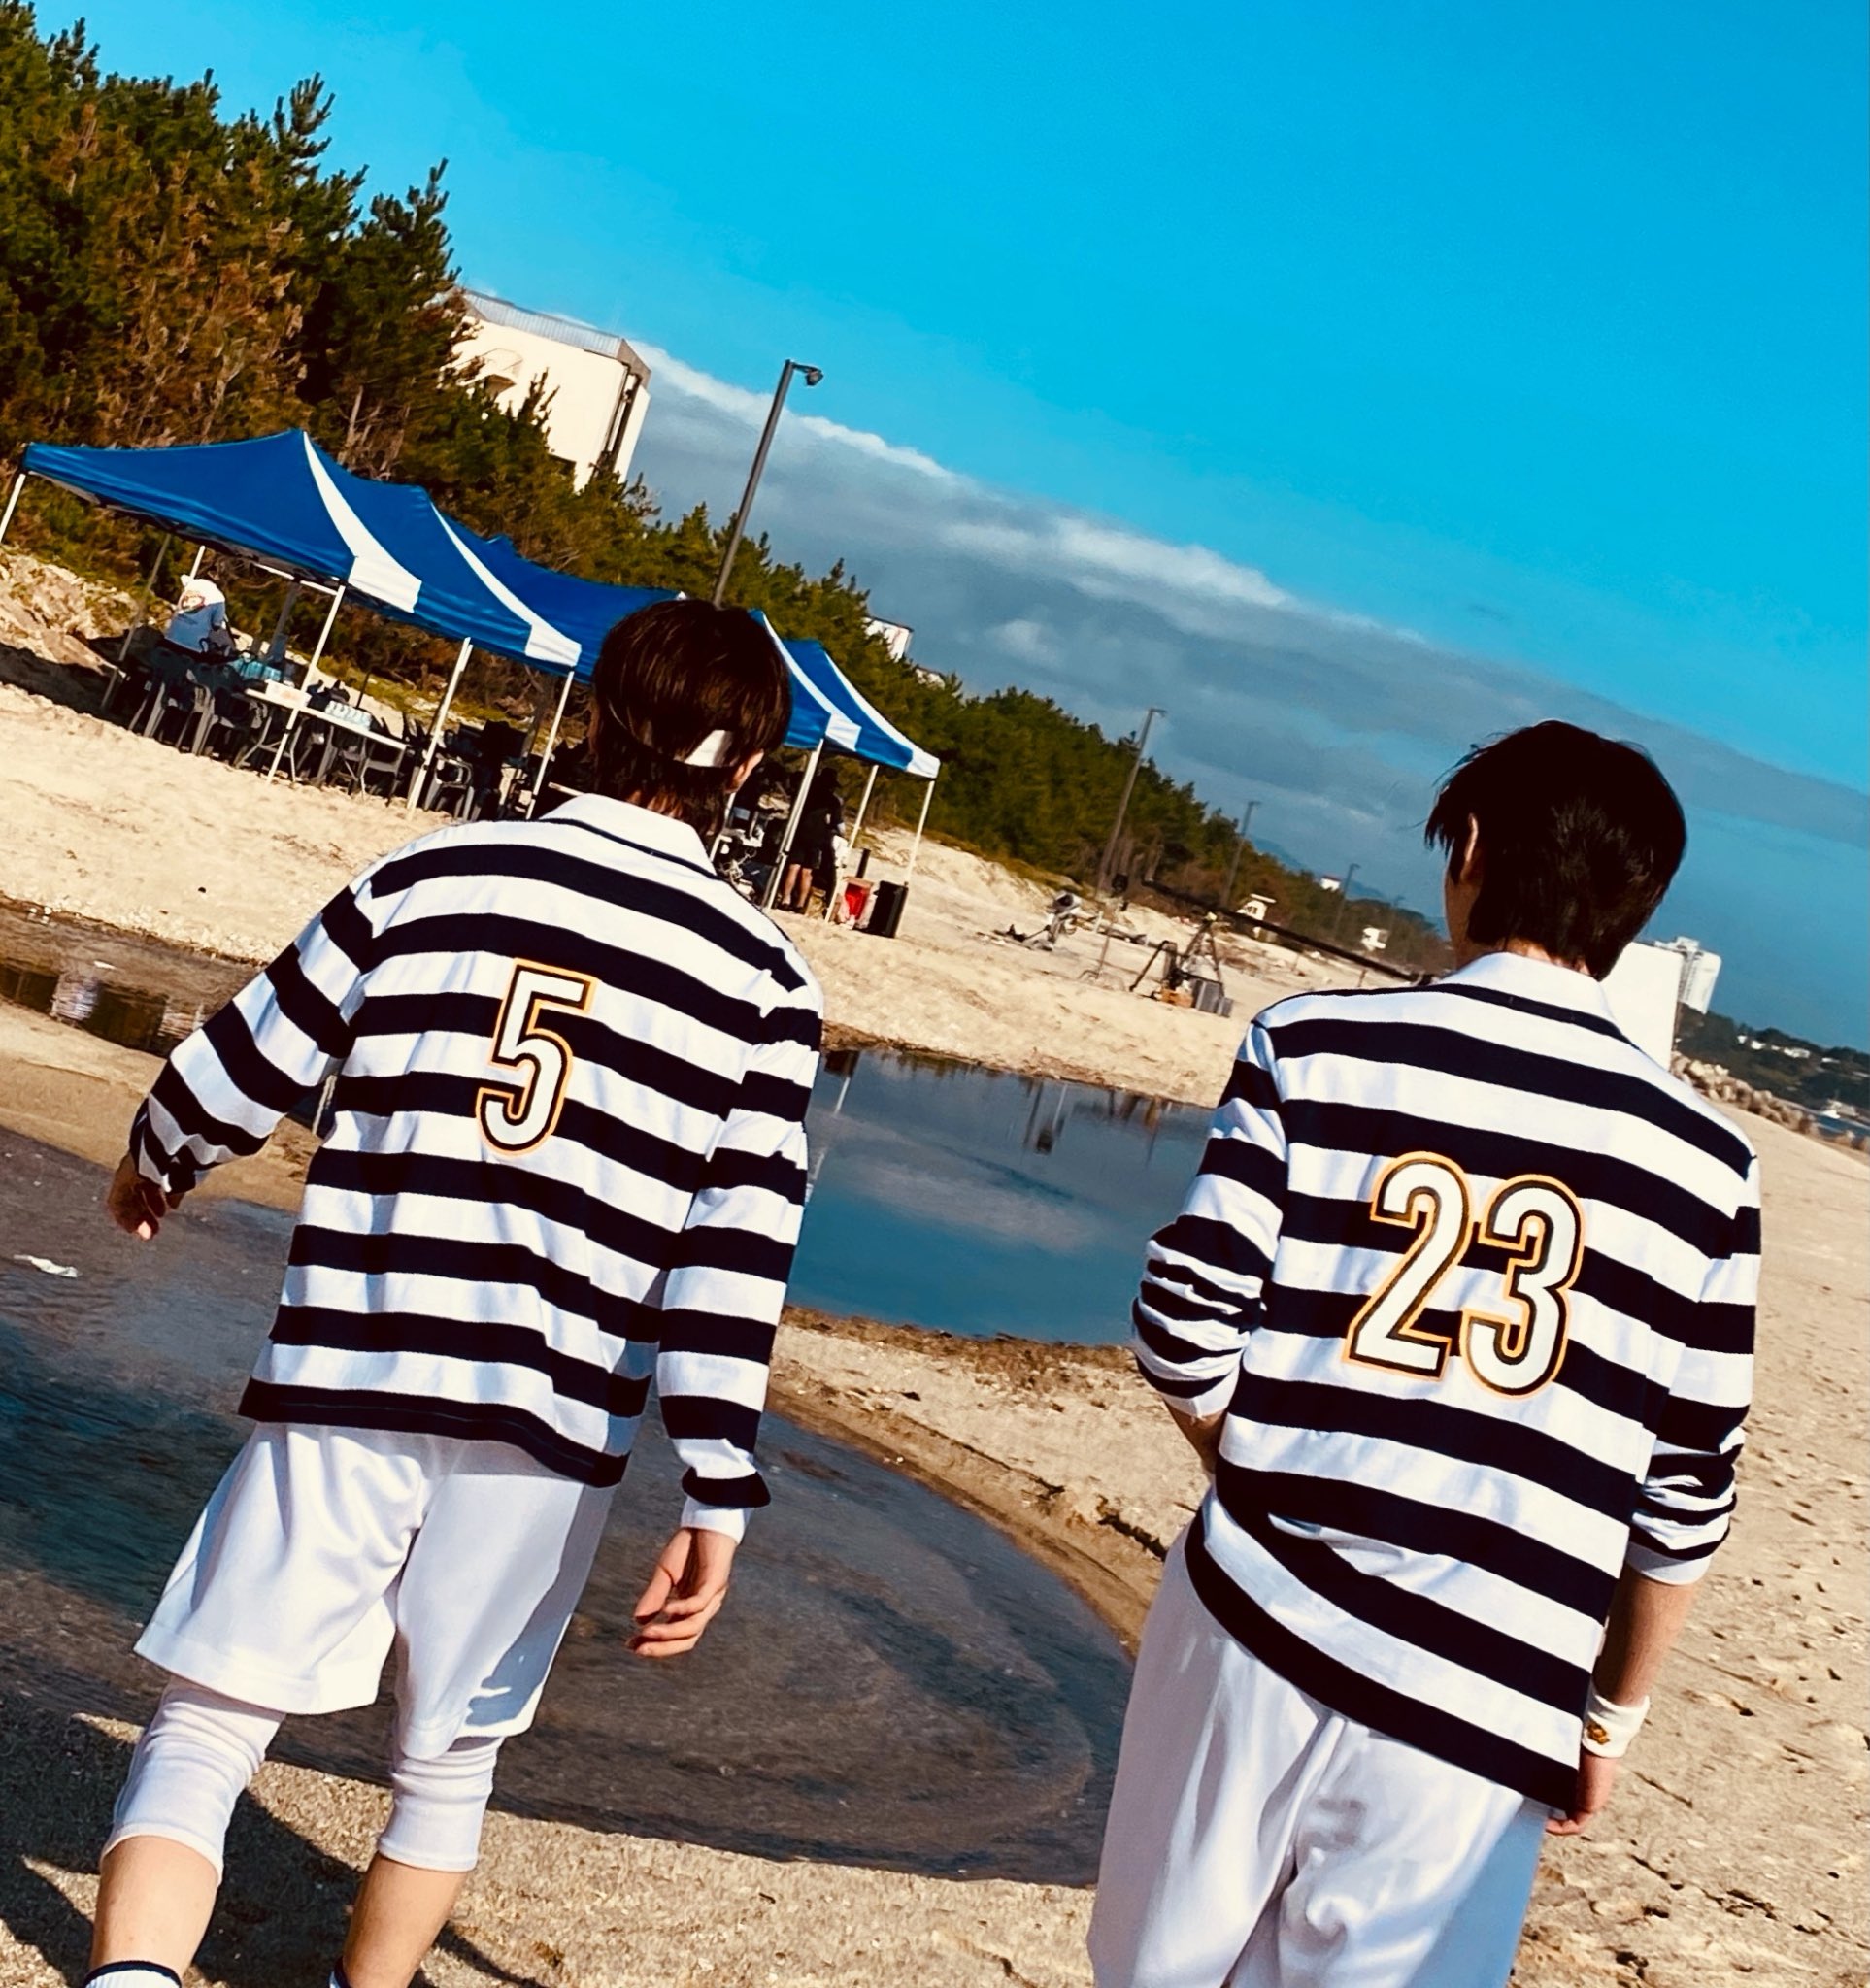 AoF⁷🔥 on X: @ENHYPEN_members Sunghoon waited for 5:23 PM to post this pic  because it's what their numbers are behind their shirt. JAKEHOON MAKING ME  CRY!😭😭😭  / X